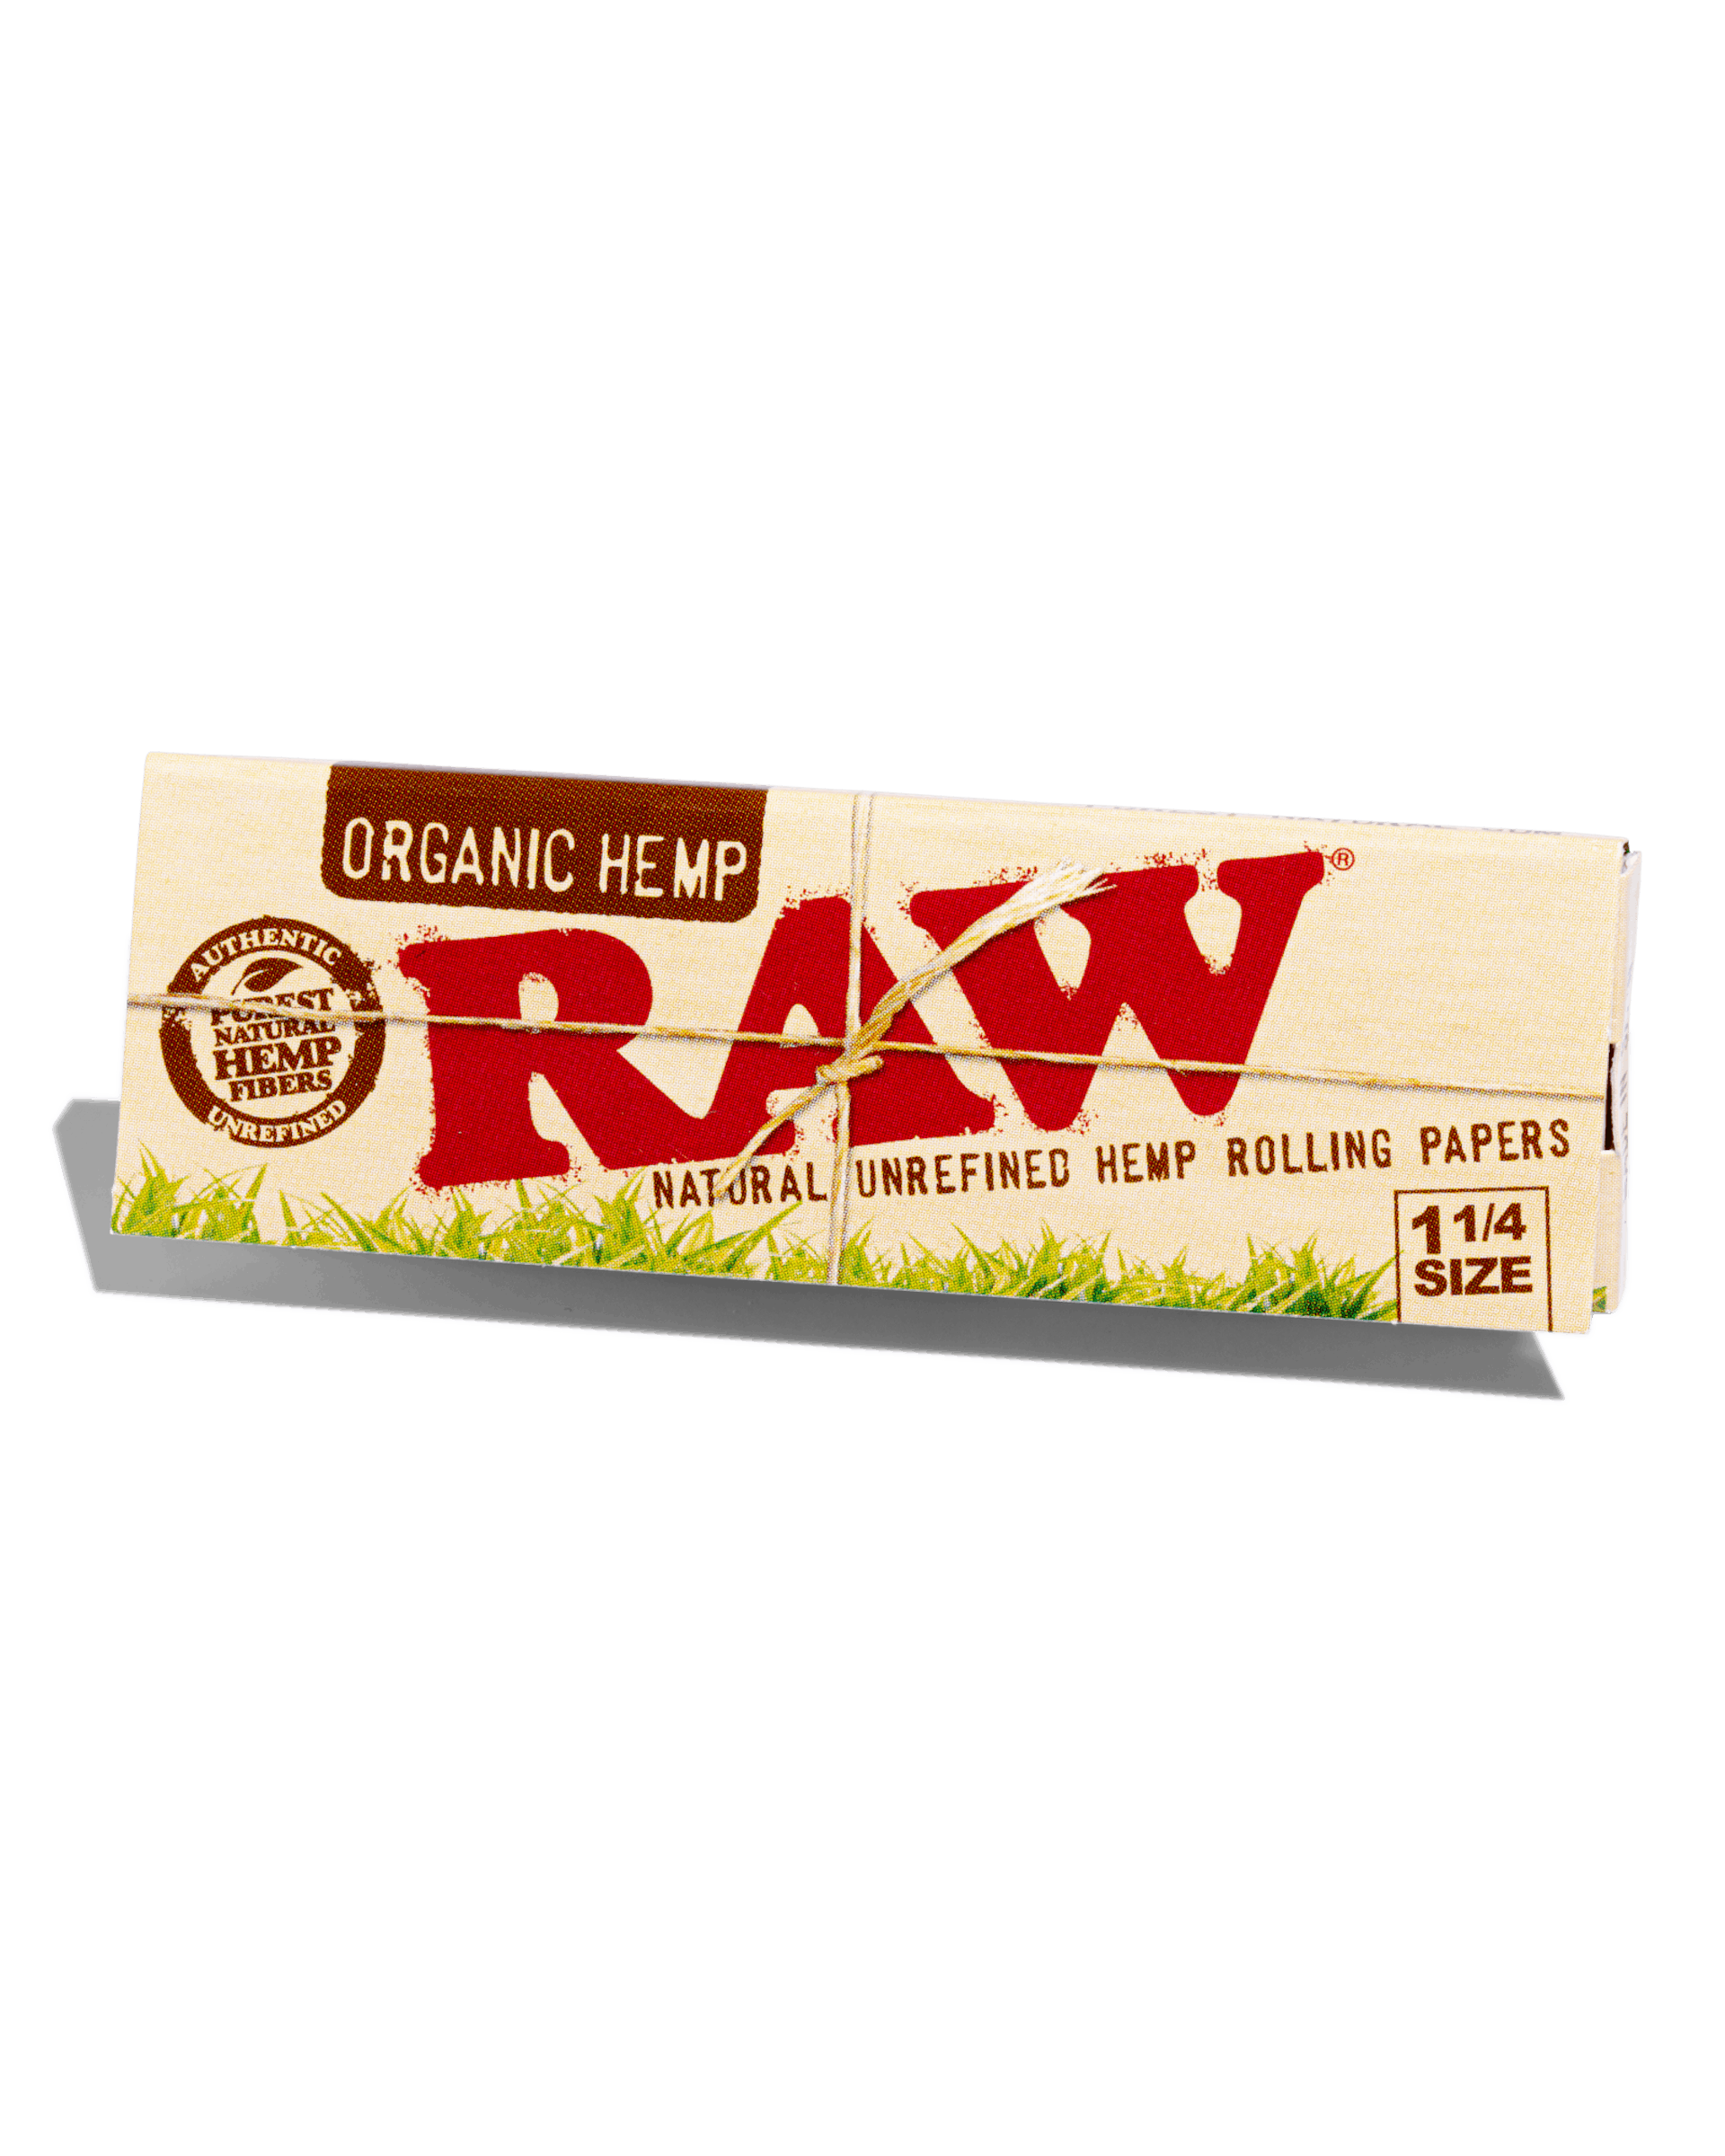 ORGANIC 1-1/4 ROLLING PAPERS